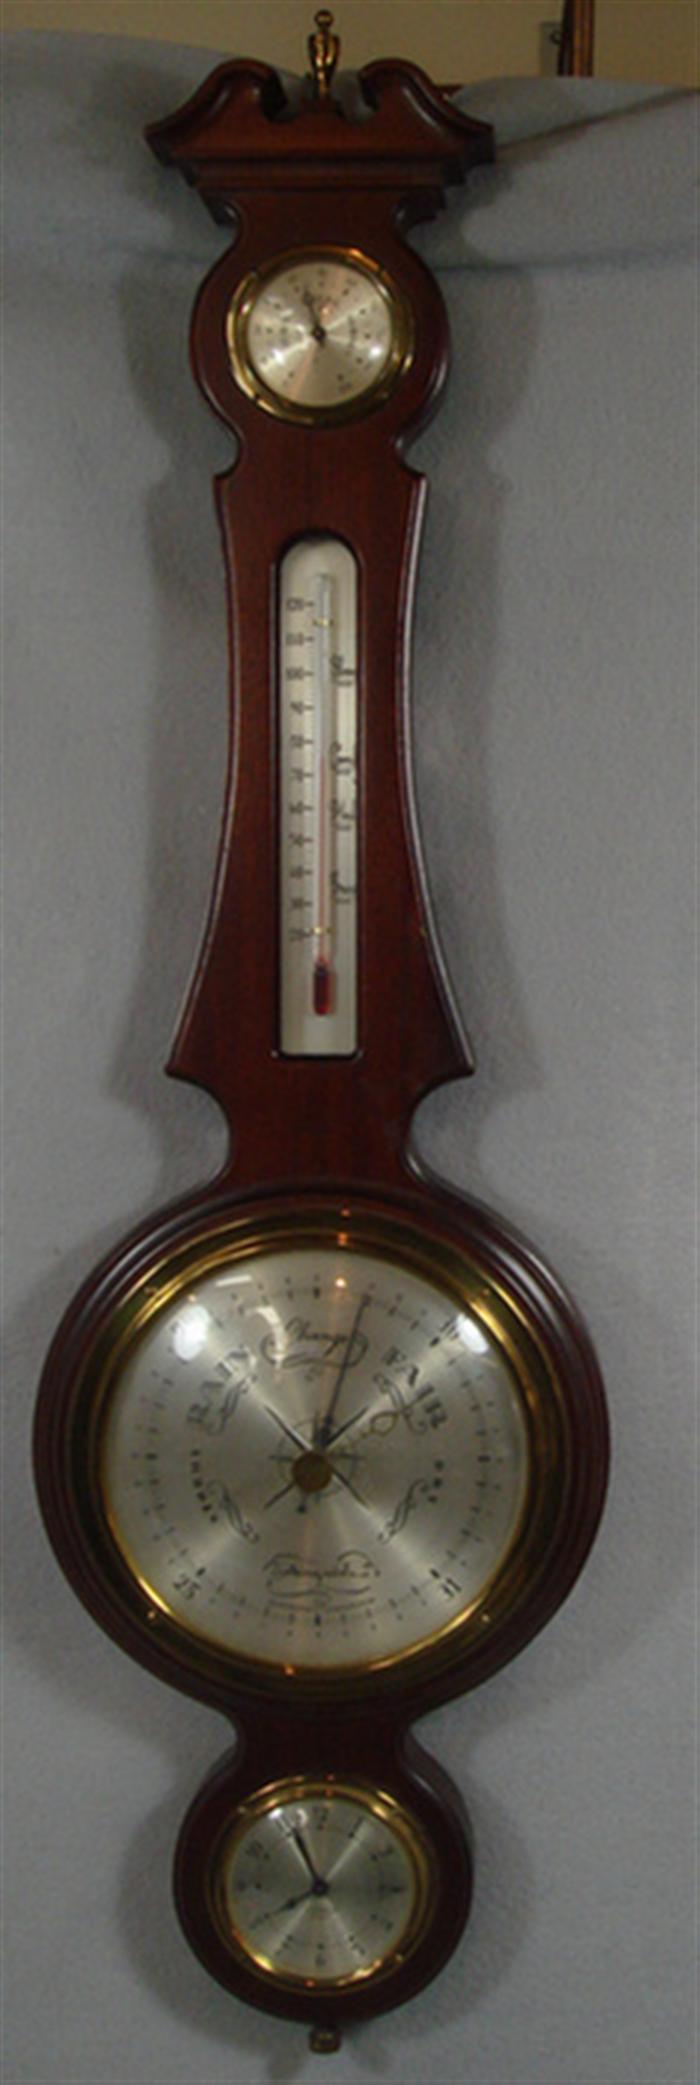 Airguide aneroid barometer with